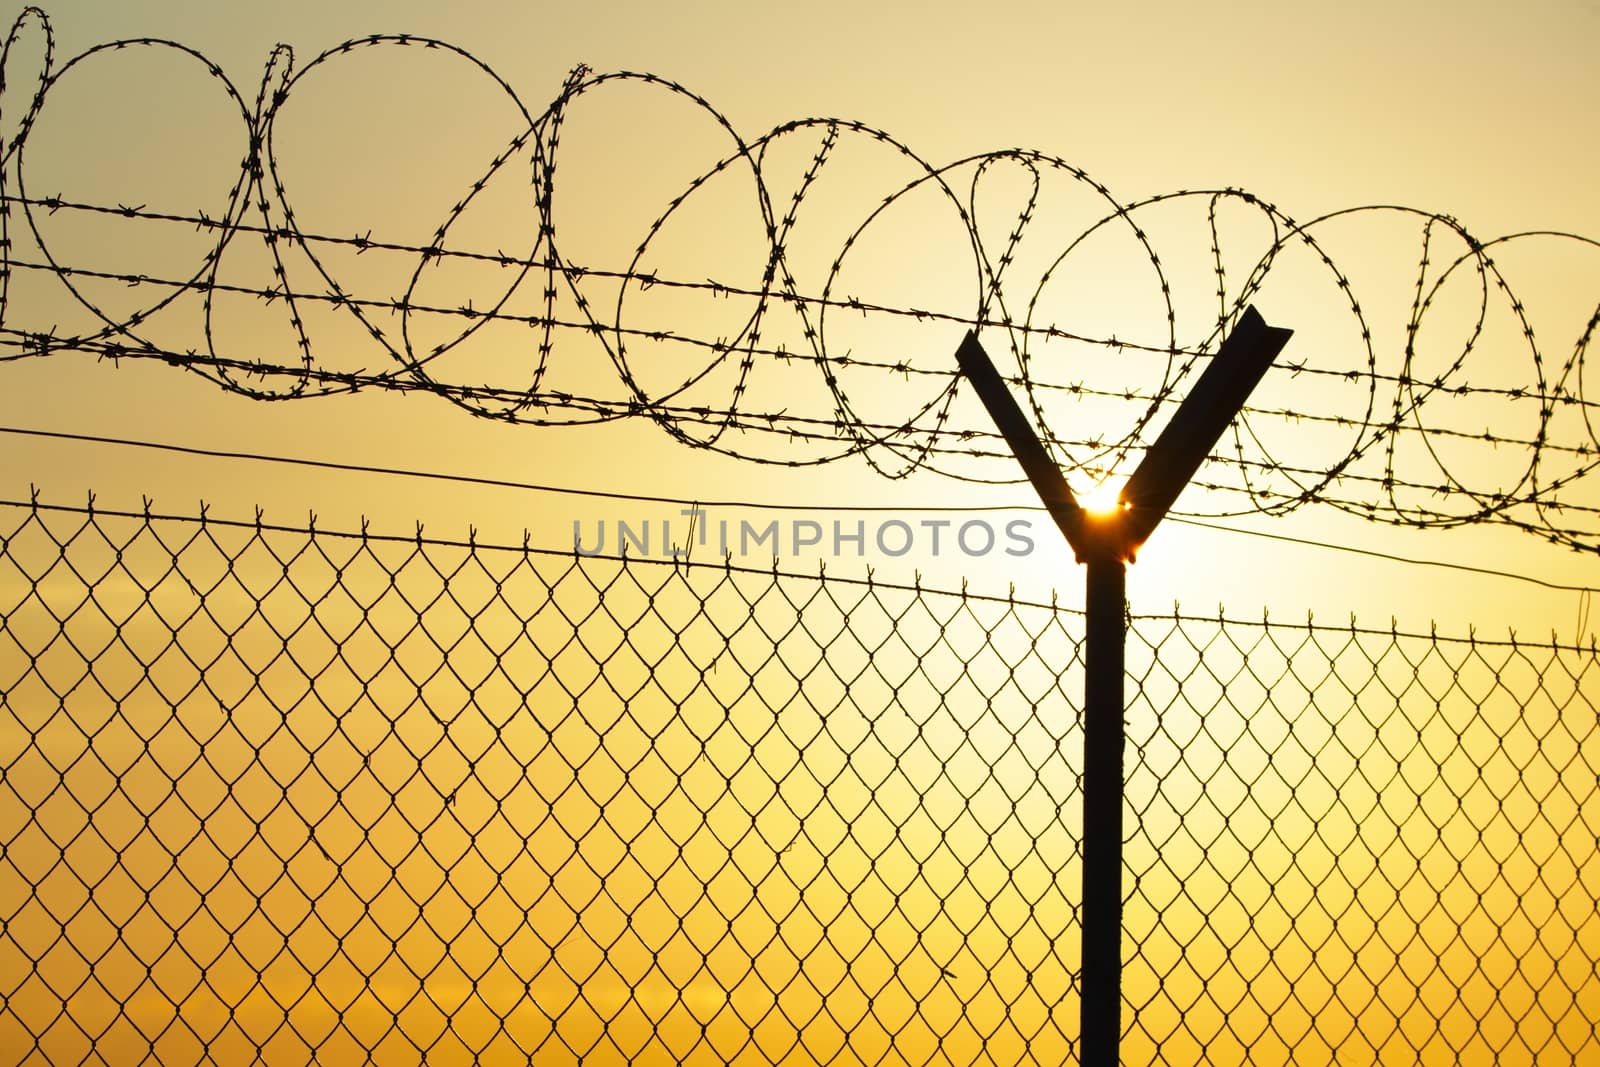 Fence covered with barbed razor wire.